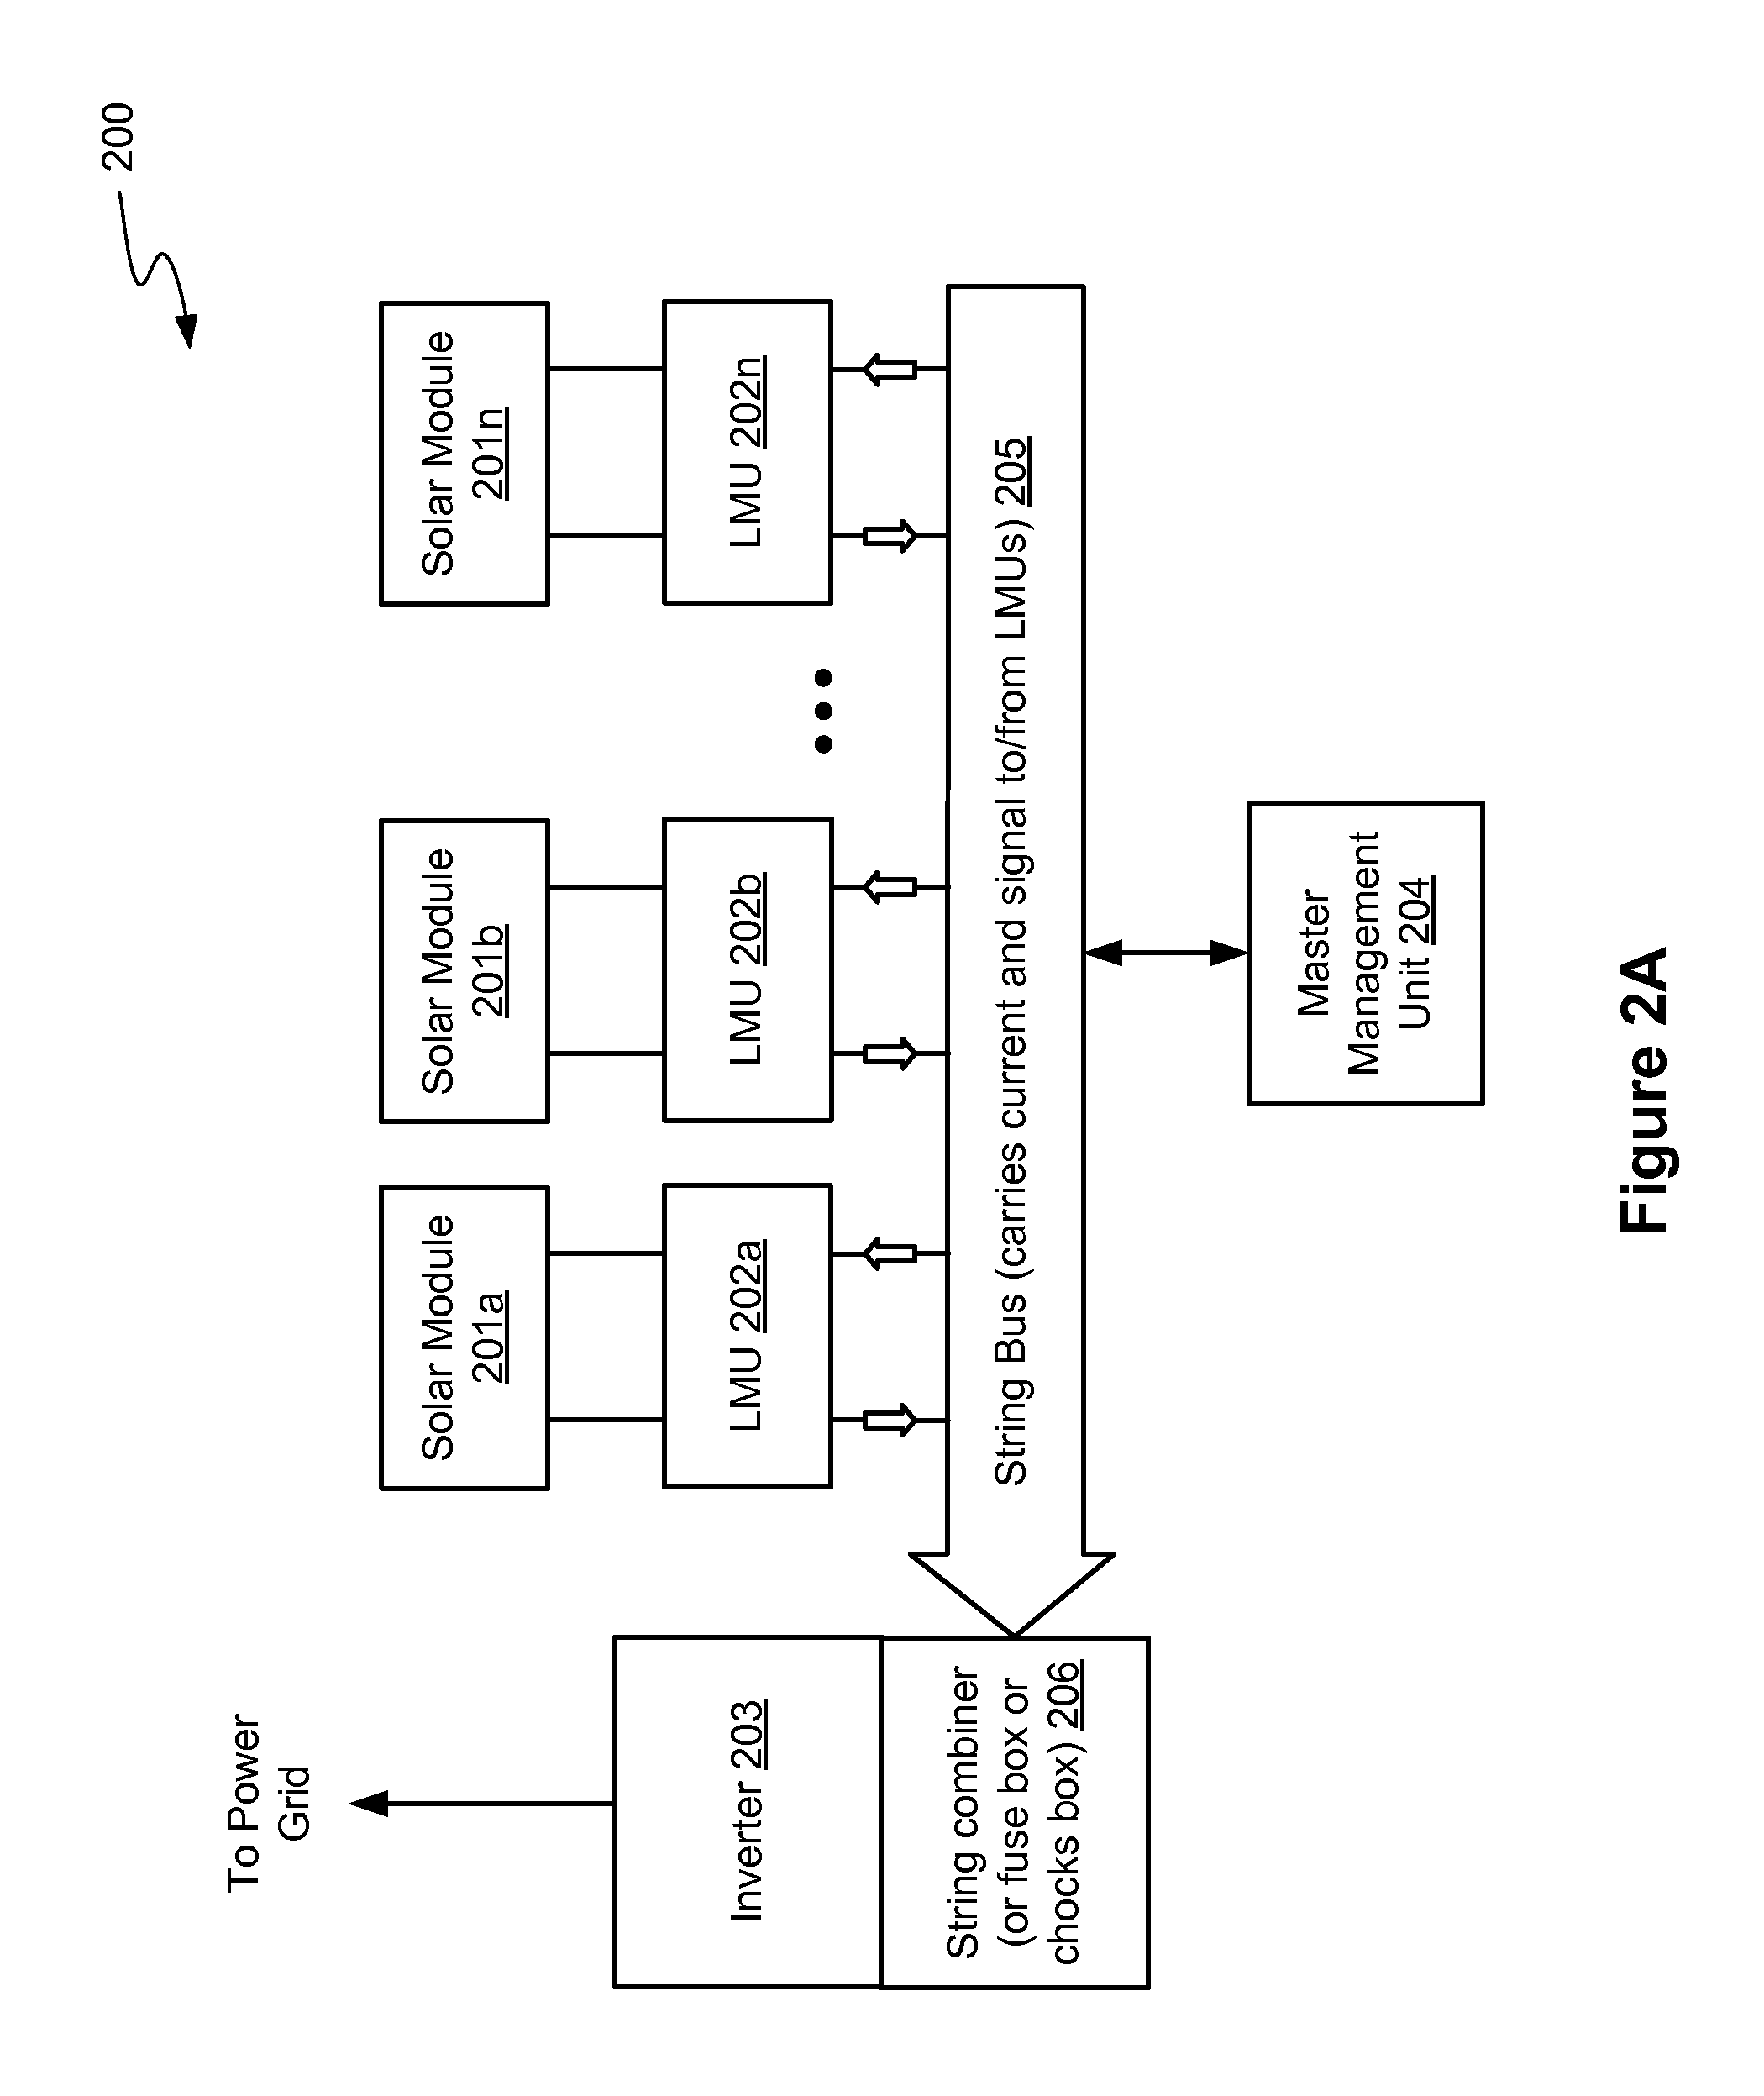 Systems and Methods for Mapping the Connectivity Topology of Local Management Units in Photovoltaic Arrays